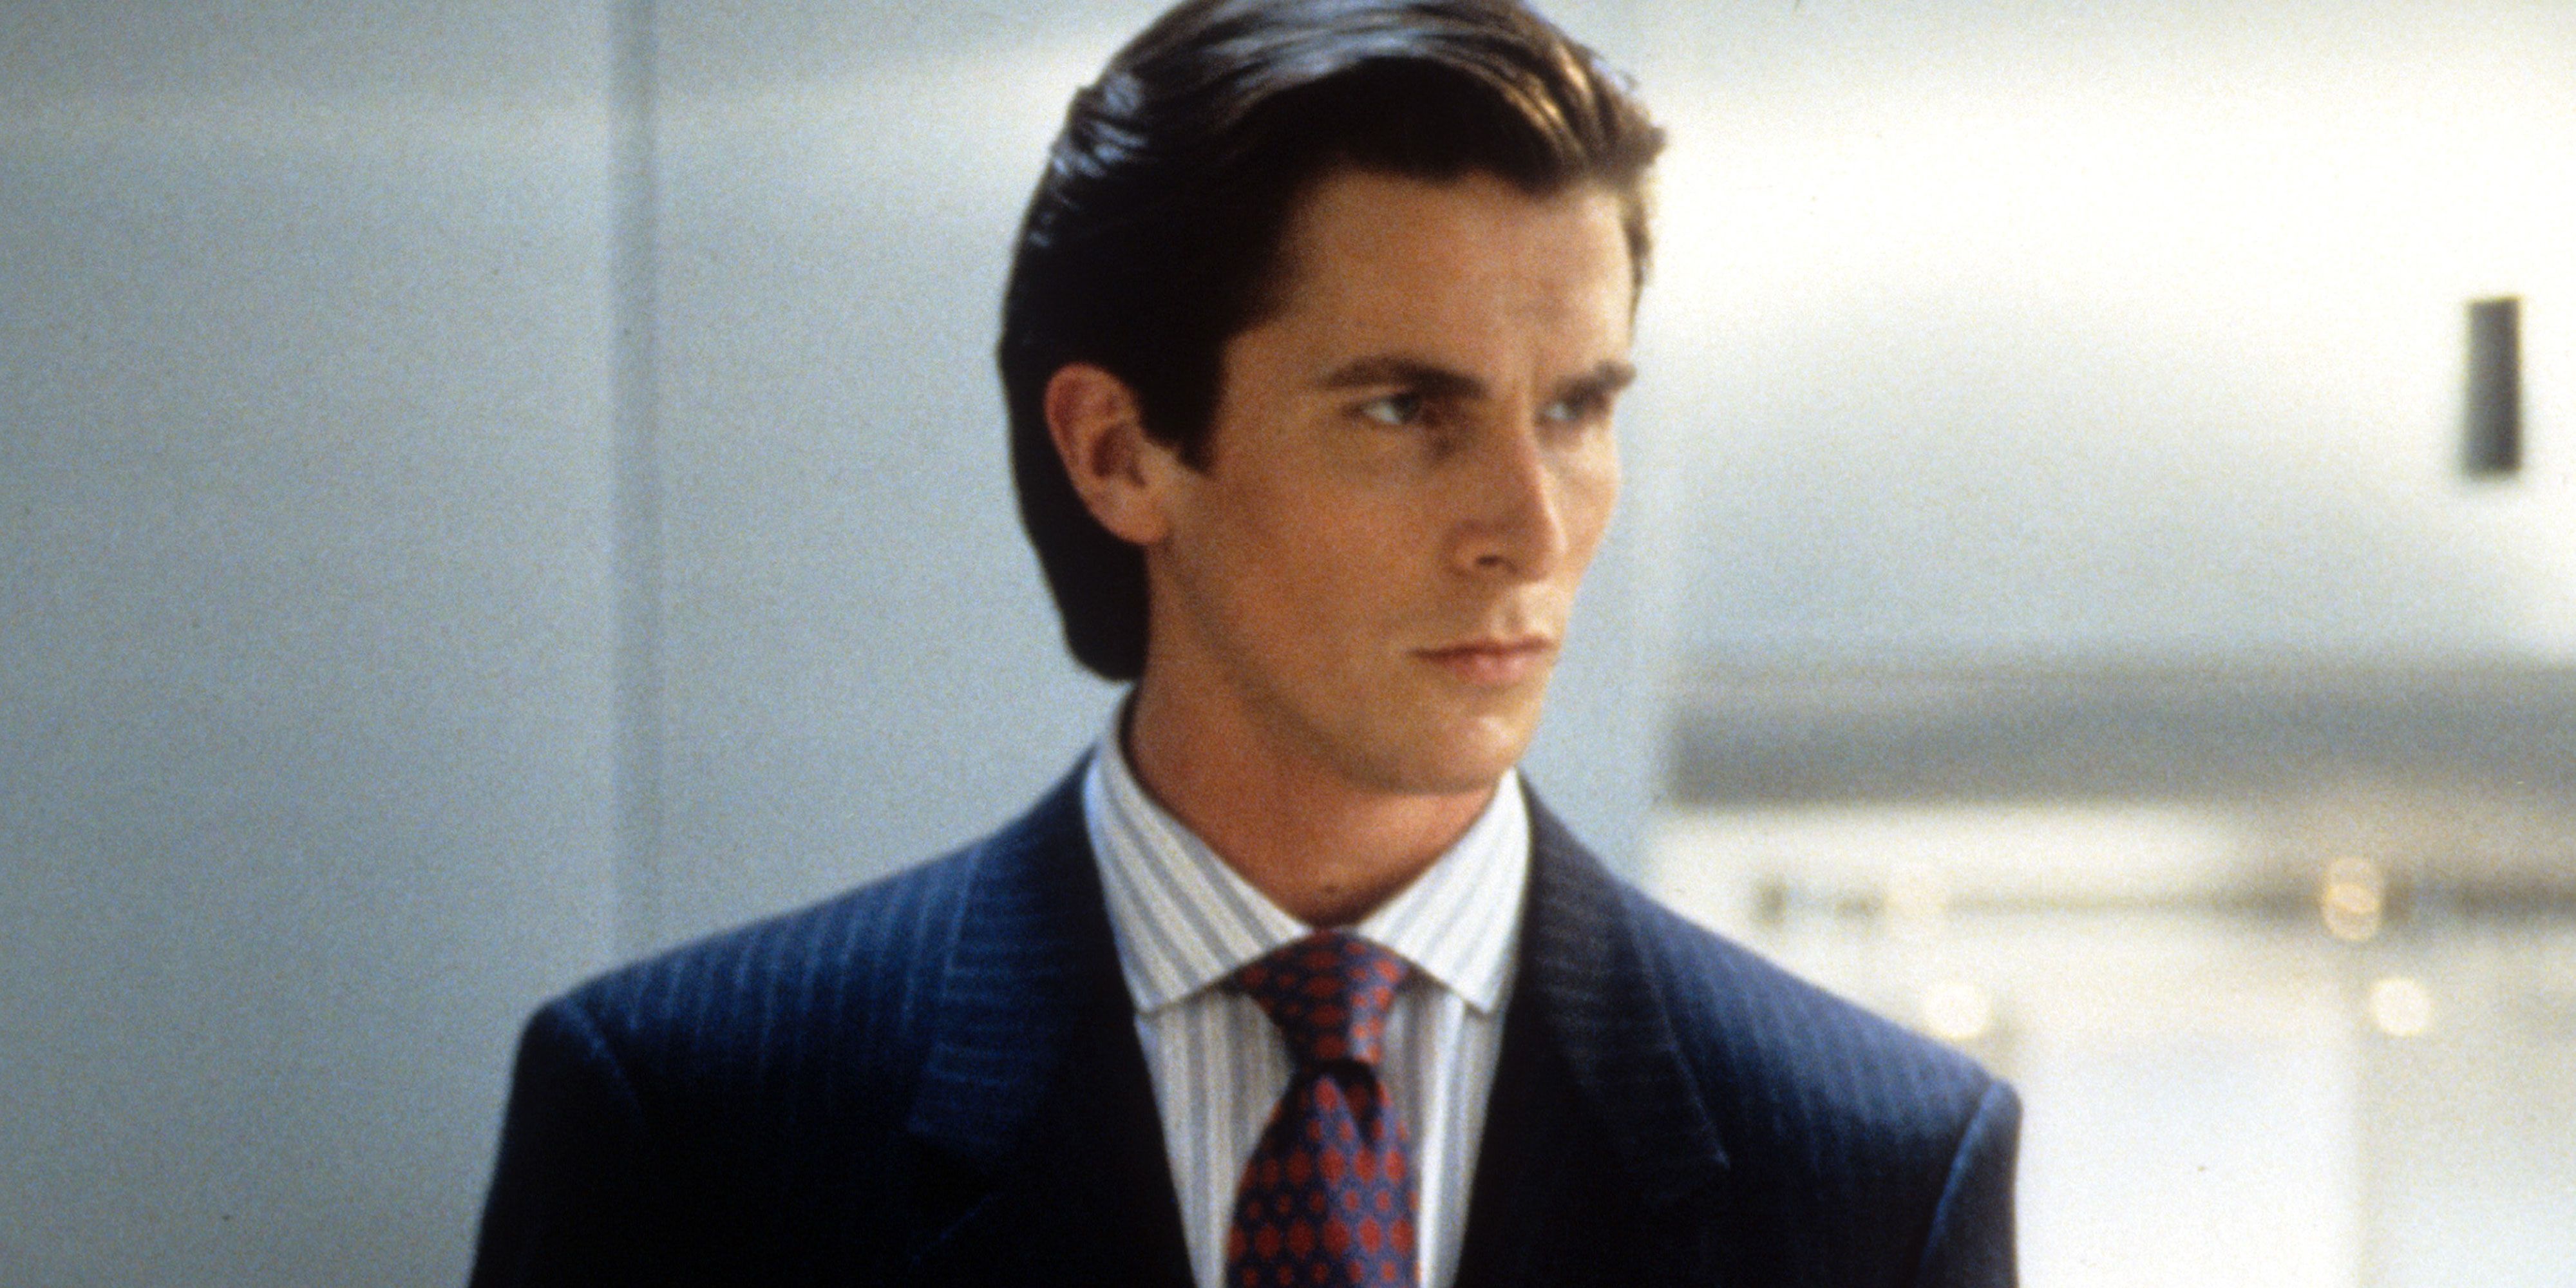 Is It Time To Revive The American Psycho-Era Of Fashion? - GQ Middle East